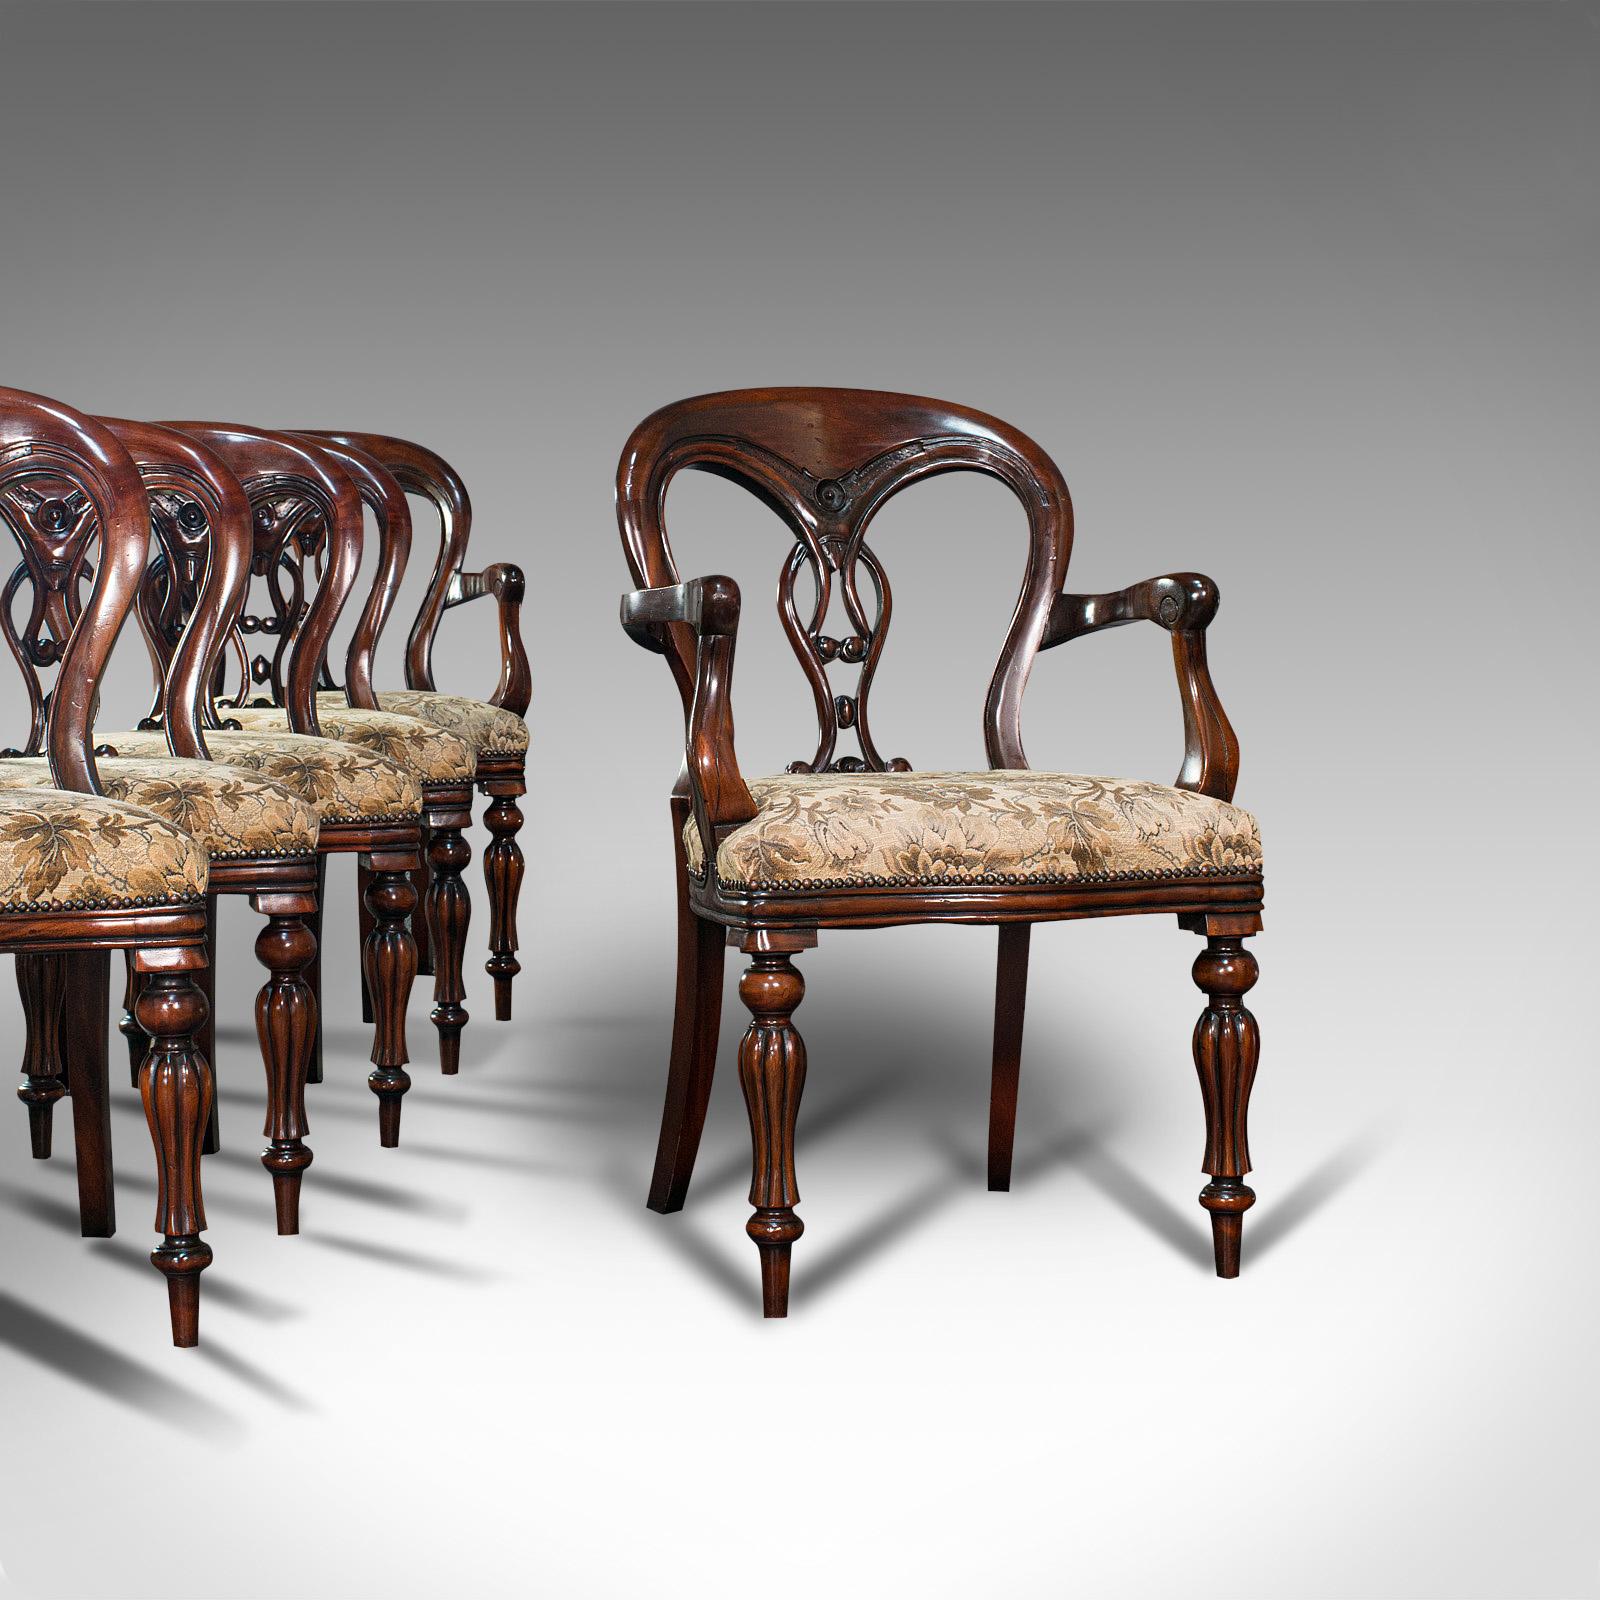 This is a superb vintage dining chair set. An English, quality mahogany and upholstered pair of carvers with 4 seats in Regency revival taste, dating to the late 20th century, circa 1980.

Wonderfully classical taste with appealing